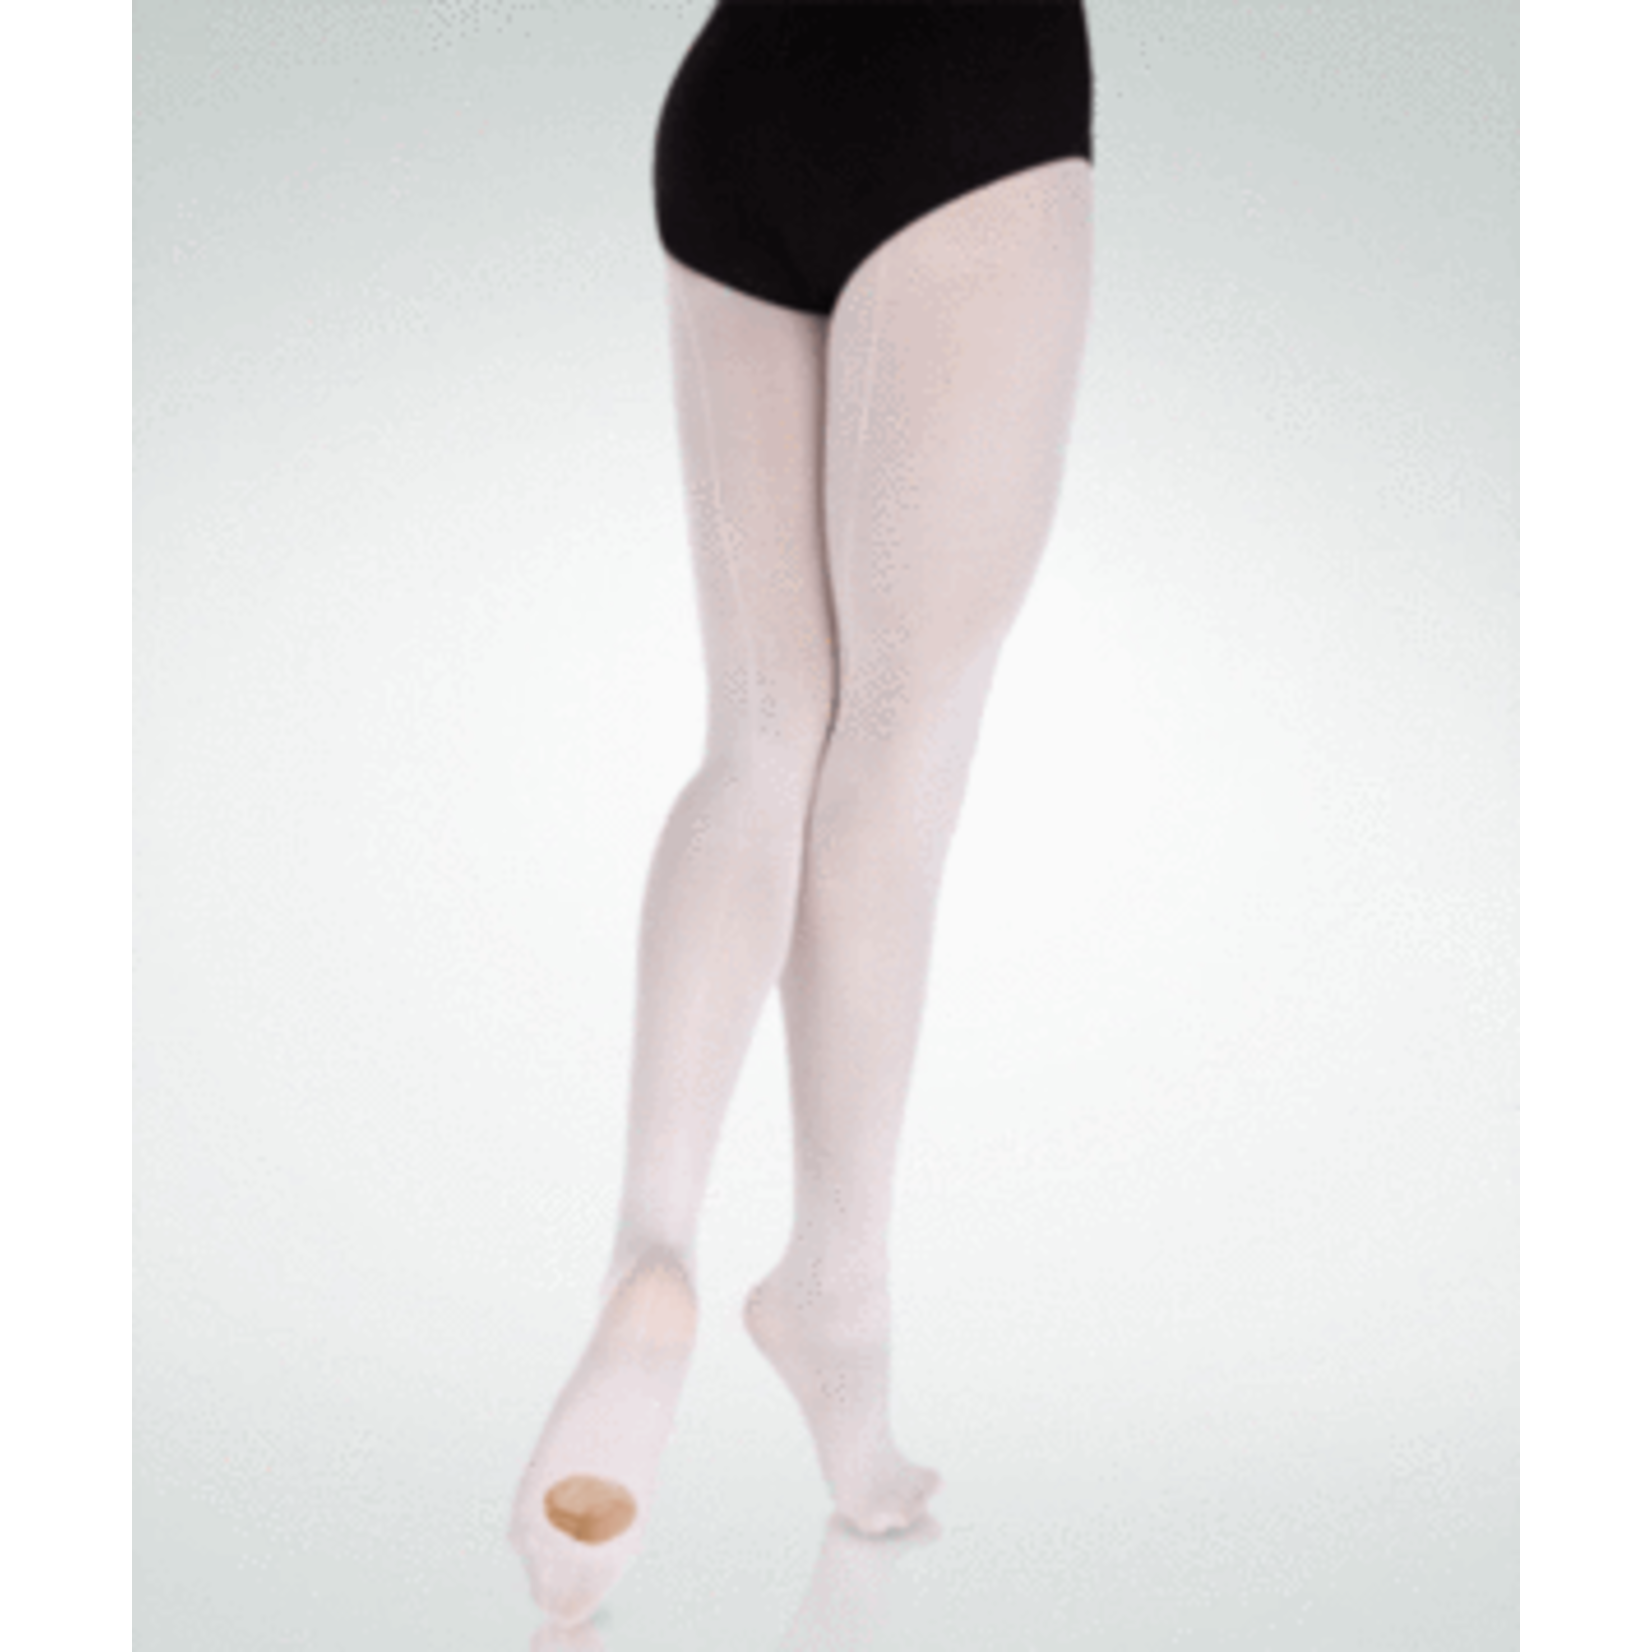 totalSTRETCH® A80 adult value footed dance tights by Body Wrappers